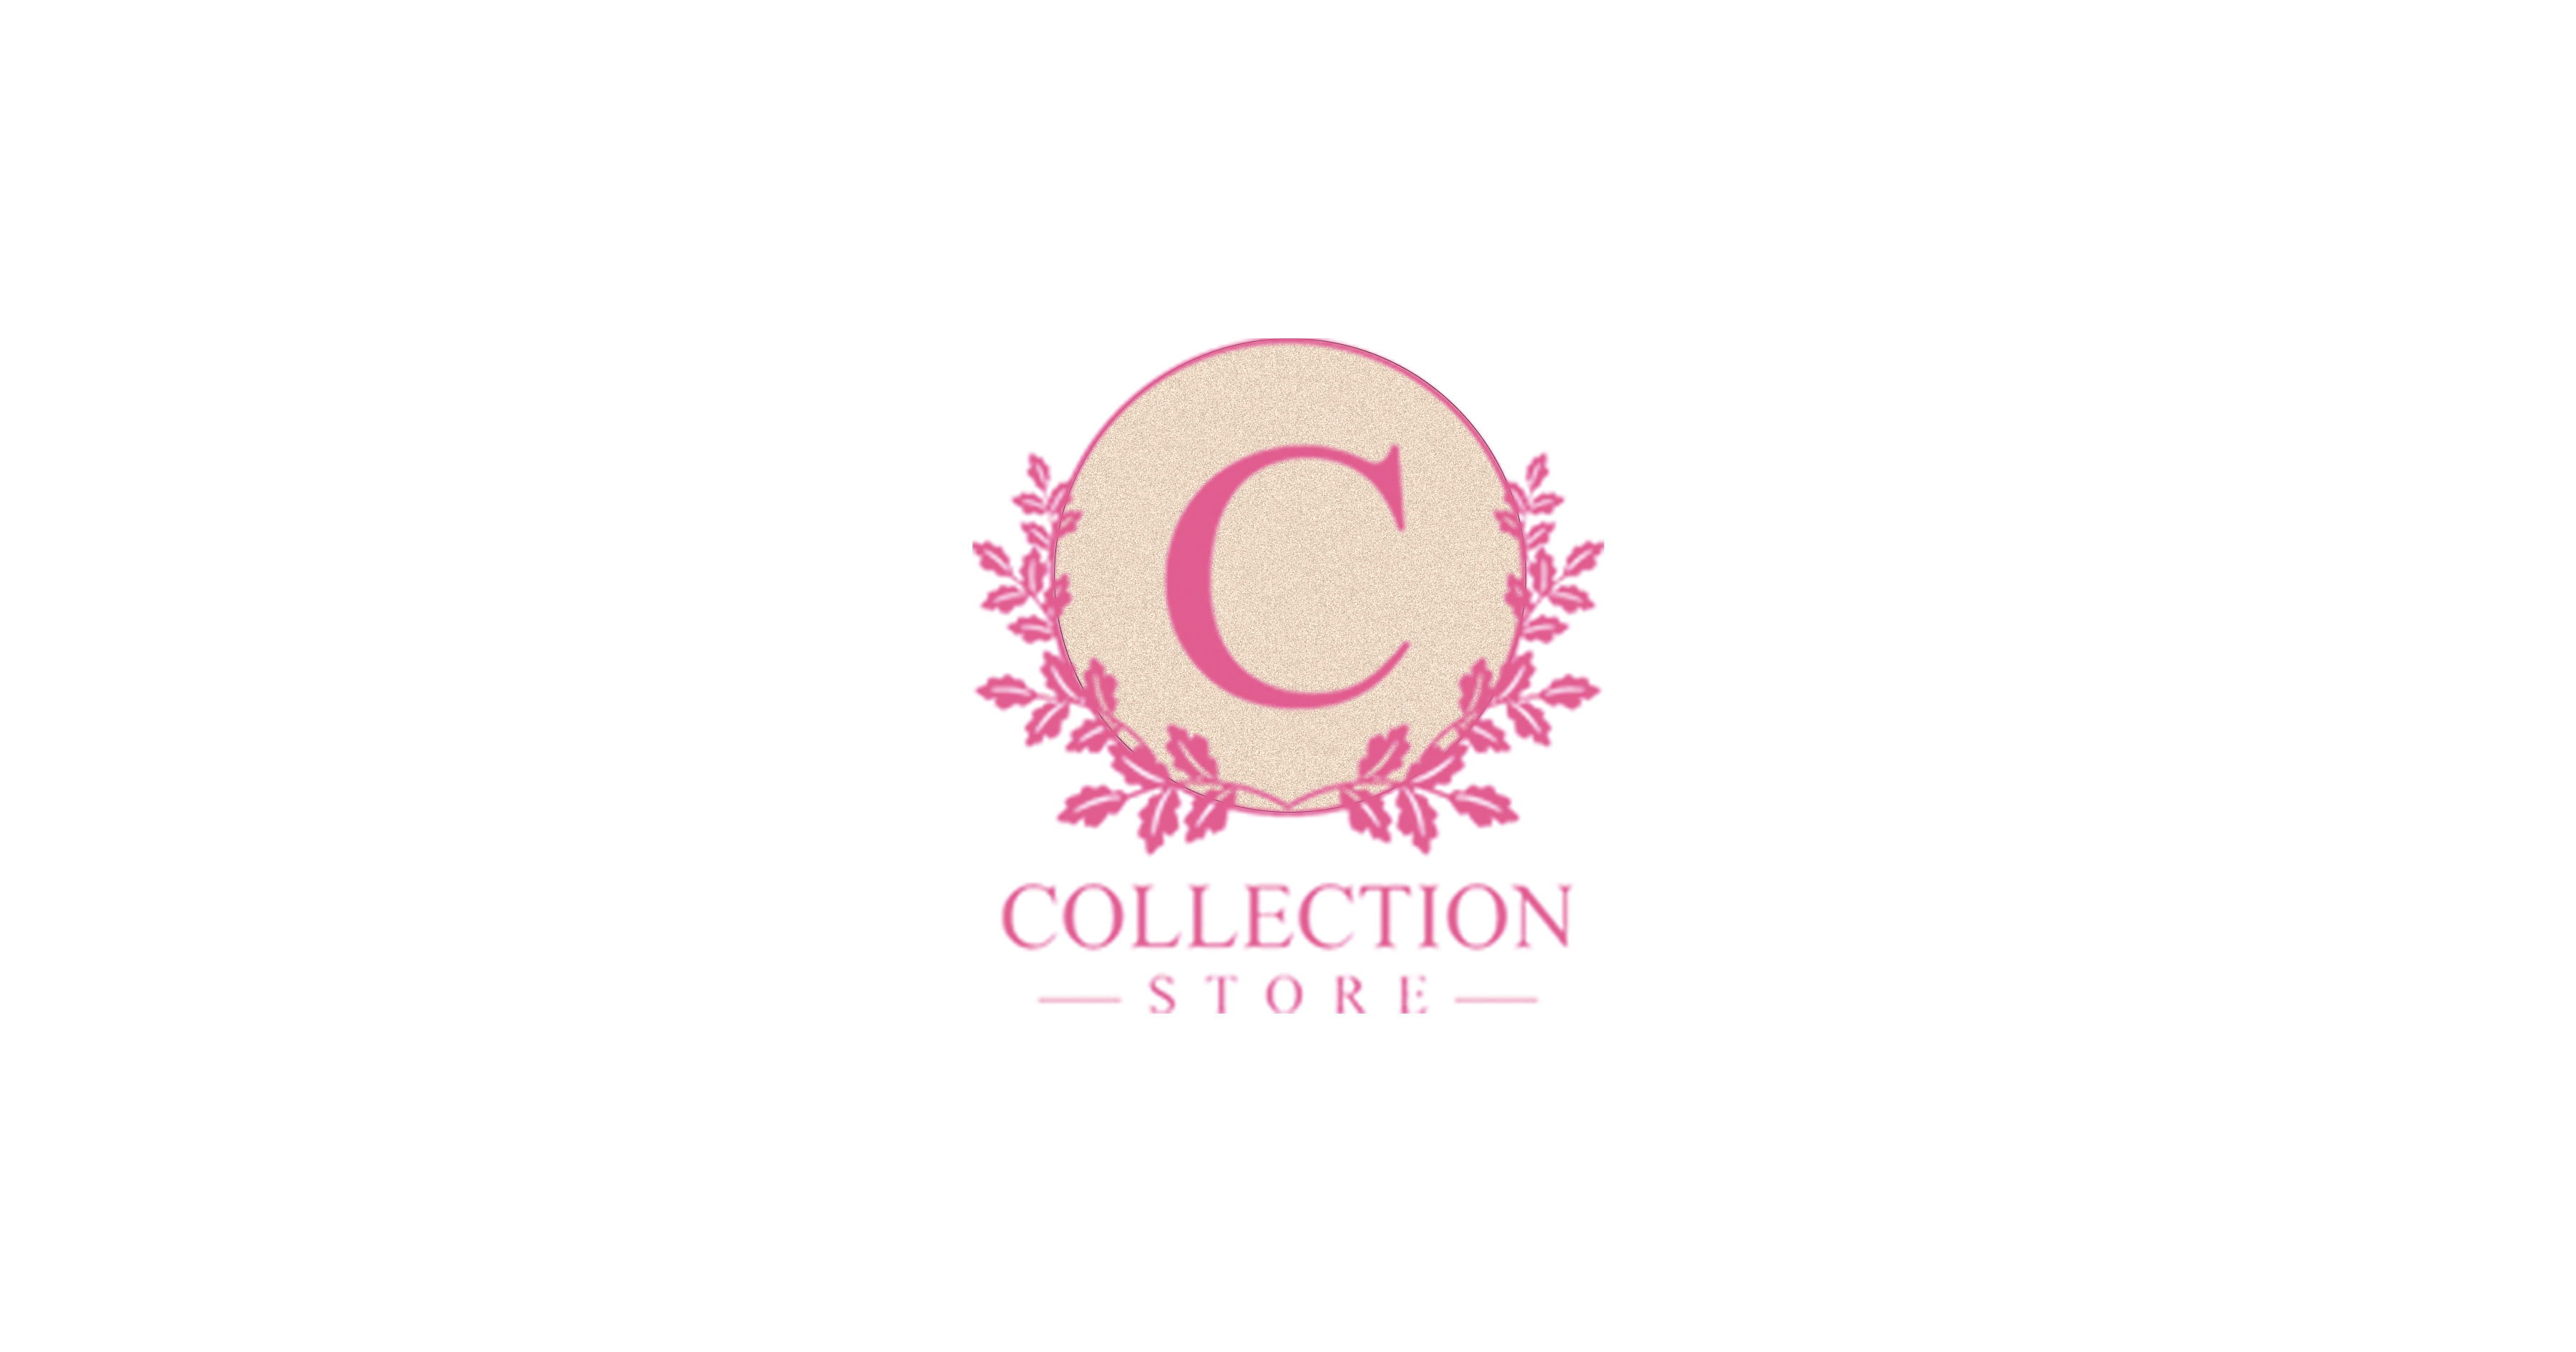 Collection Store